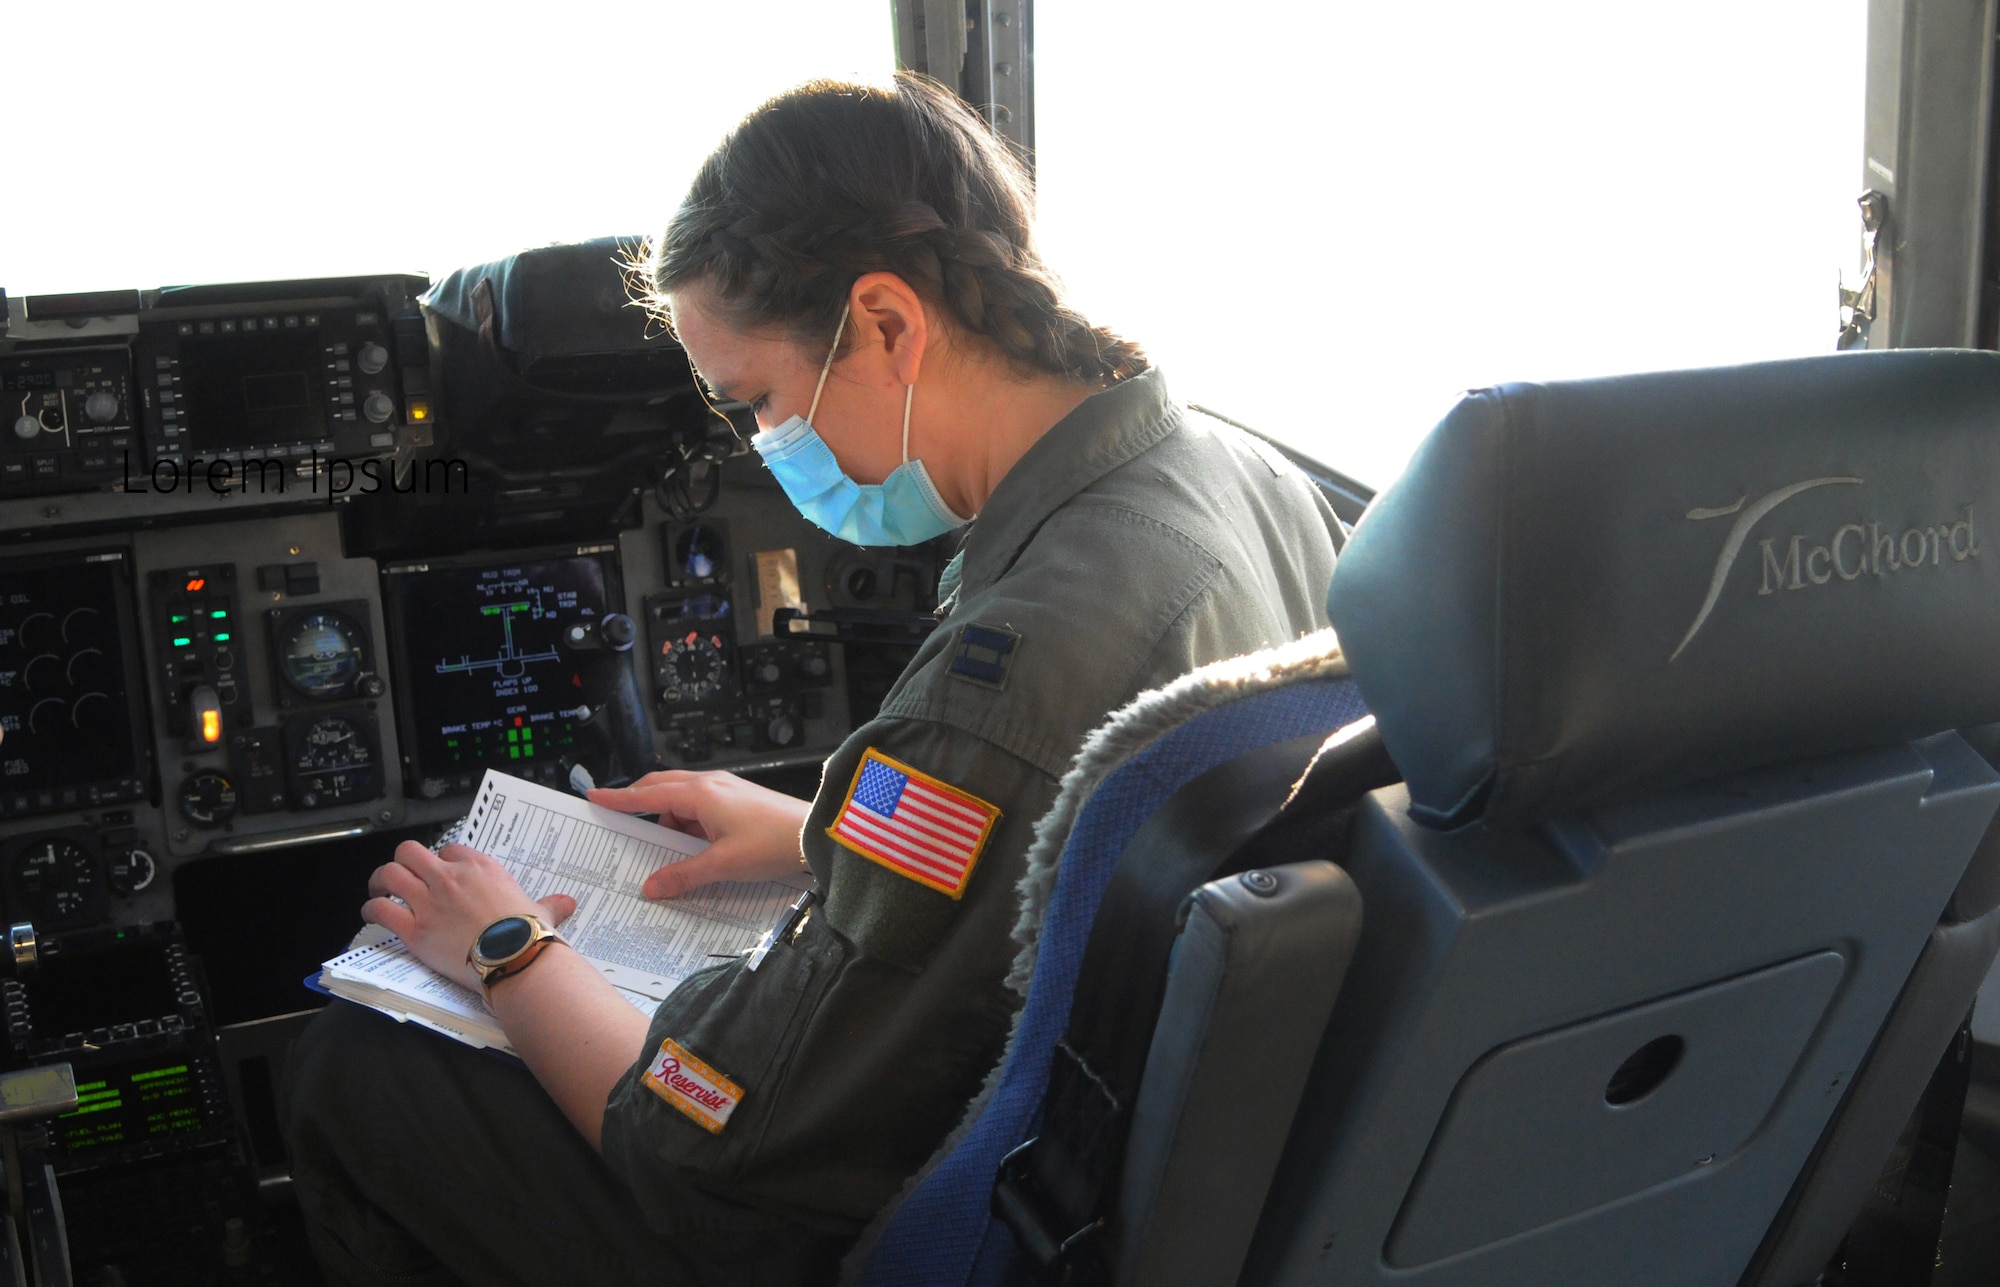 Capt. Rachel Sallee, a pilot assigned to the 728th Airlift Squadron, performs pre-flight checks before takeoff in a C-17 Globemaster III March 11 at McChord Field, Washington.